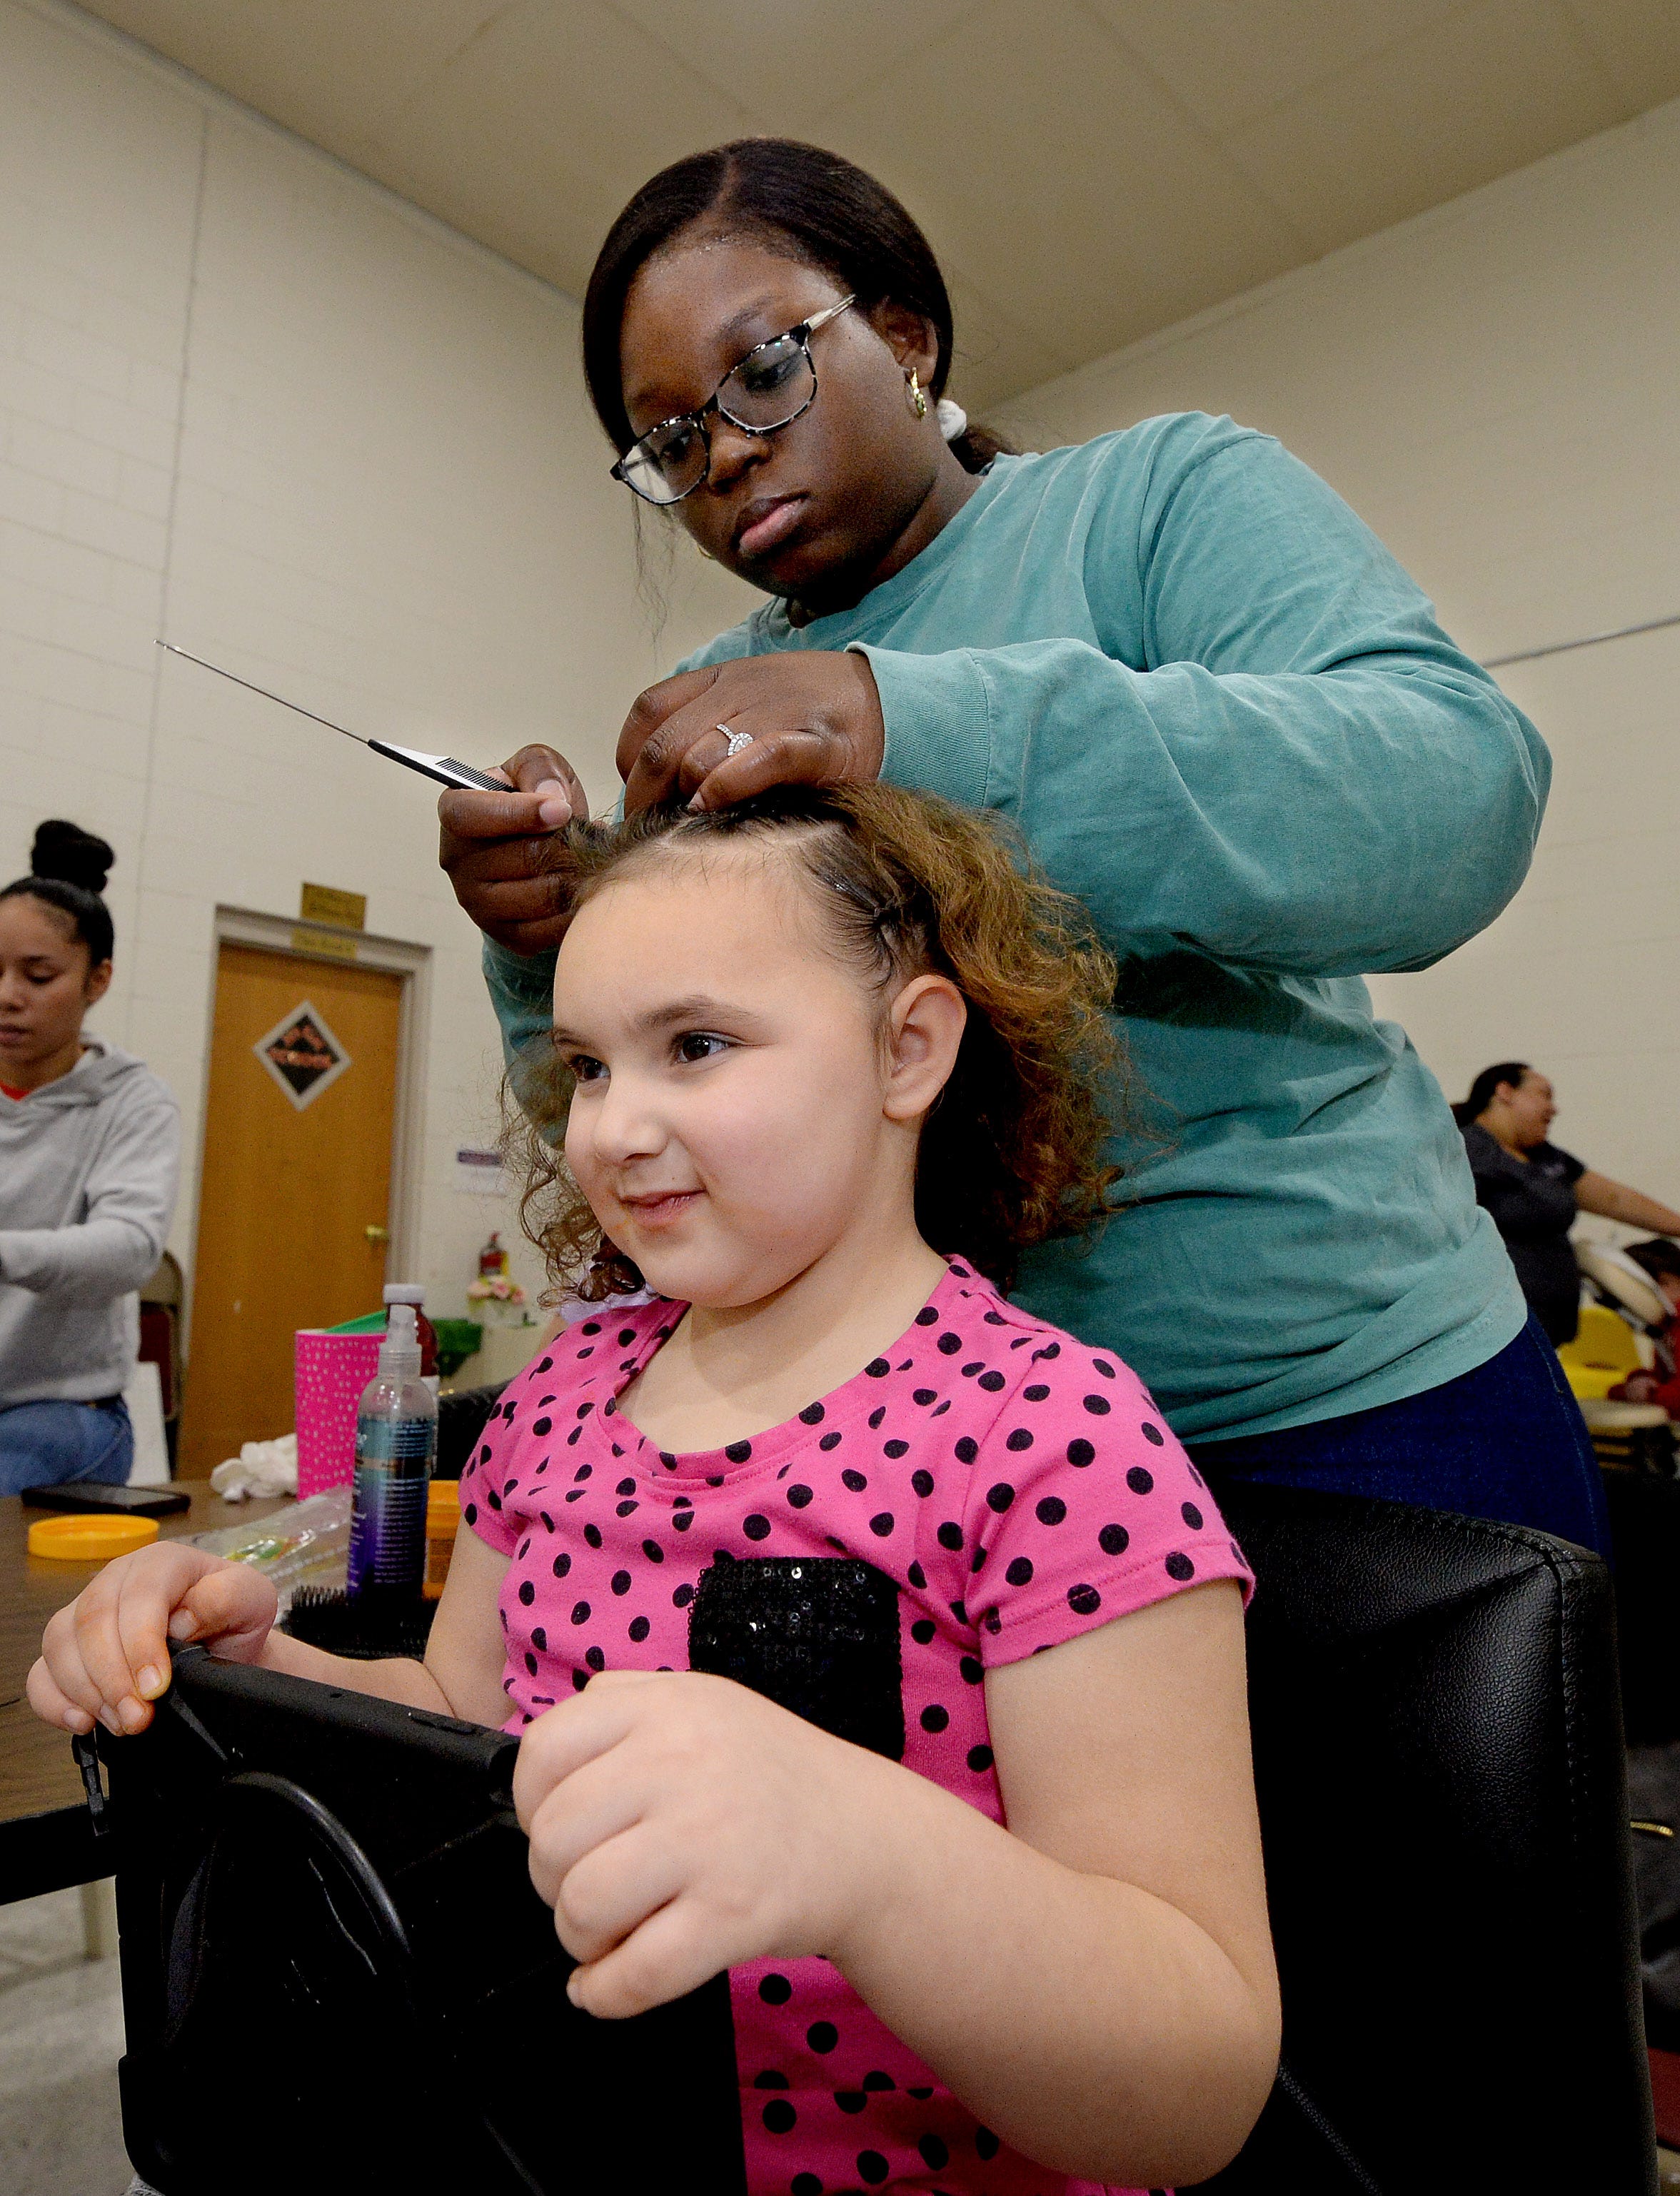 Girls Glory offers free hair braiding services and techniques